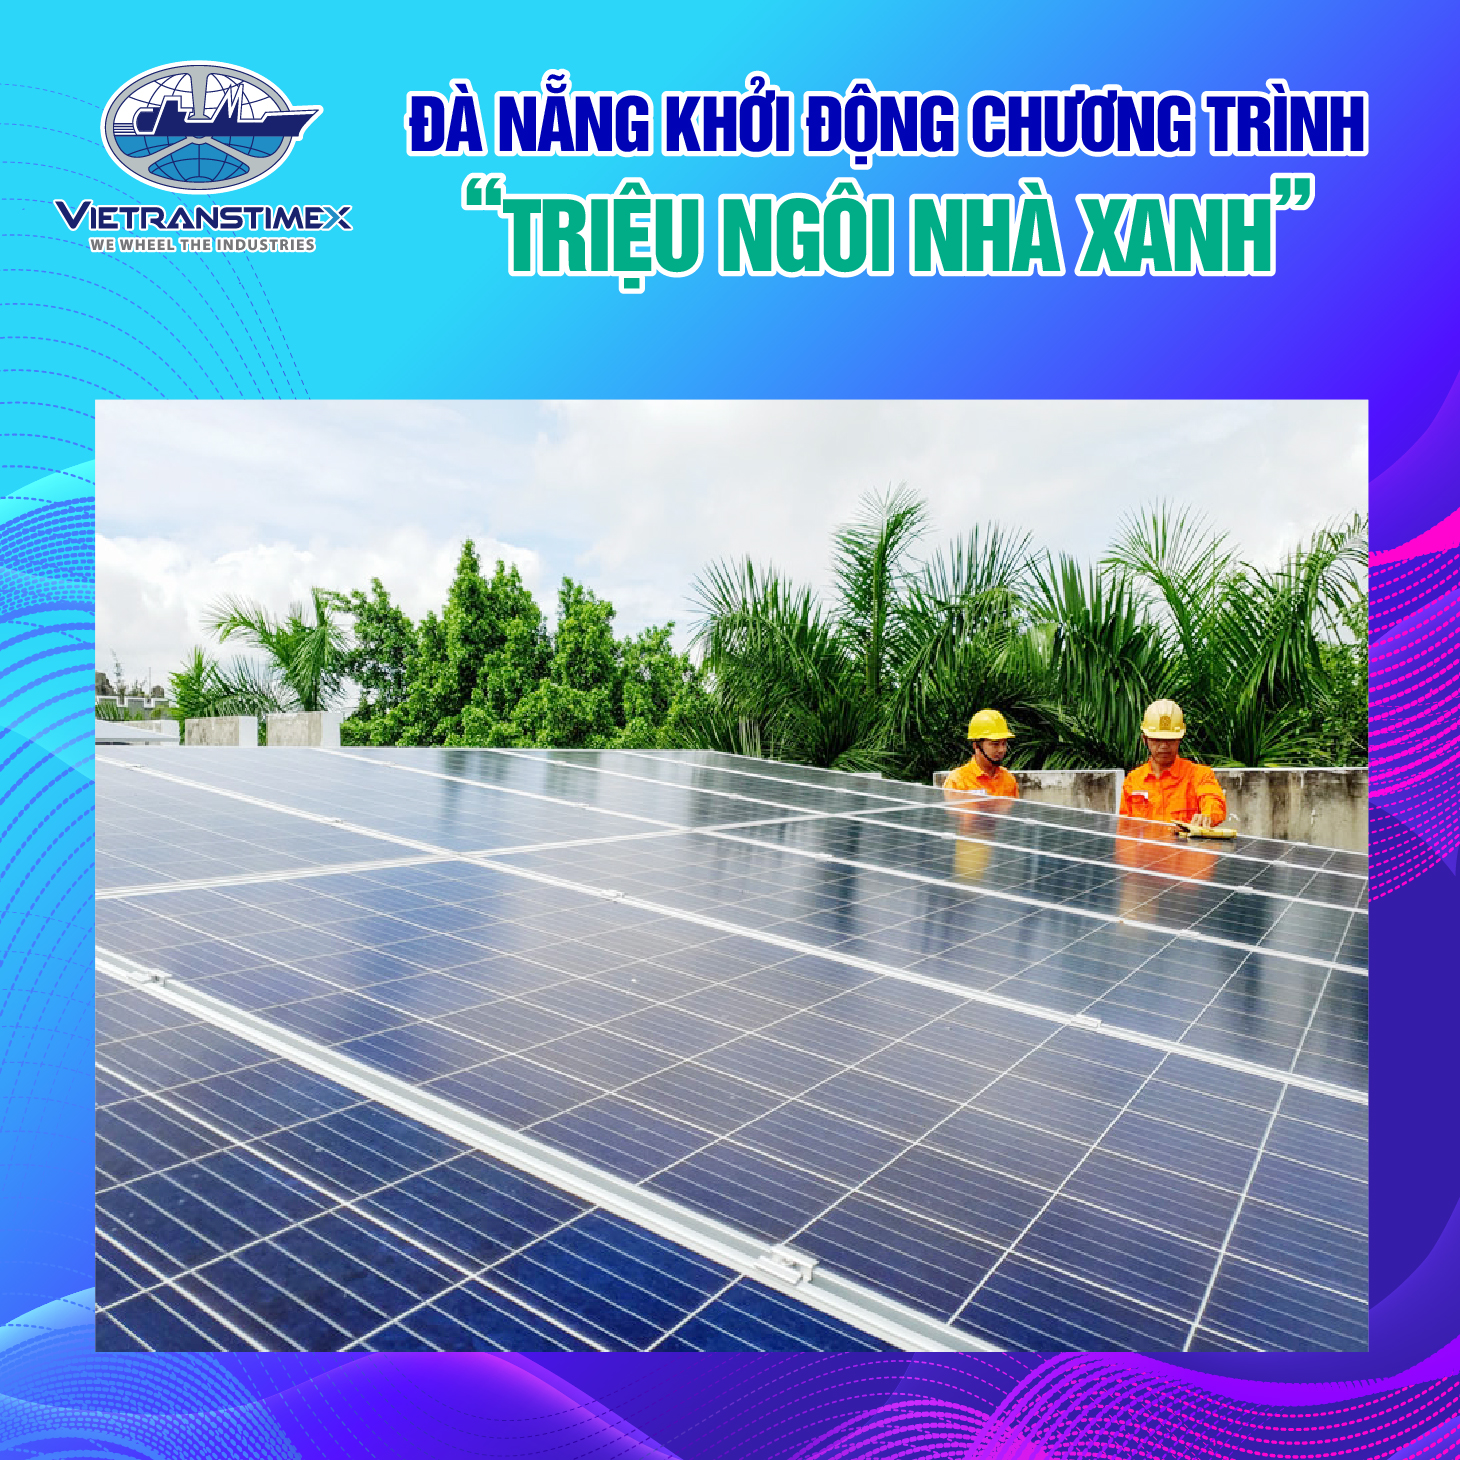 Danang Begins One Million ‘Green’ House Projects